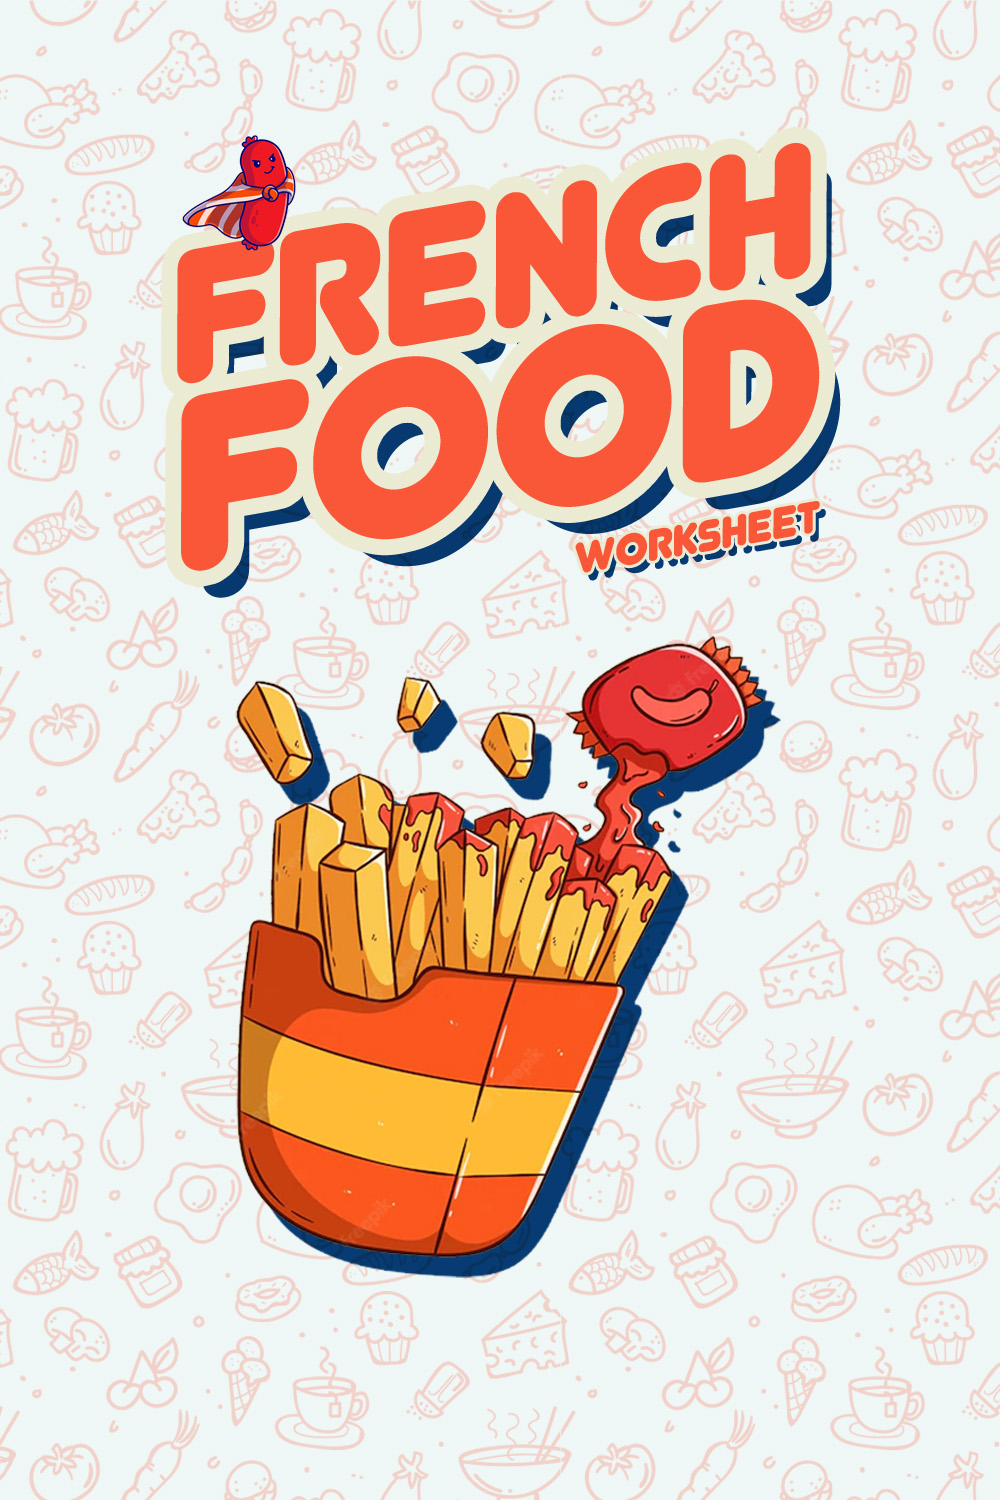 Printable Worksheets for French Food